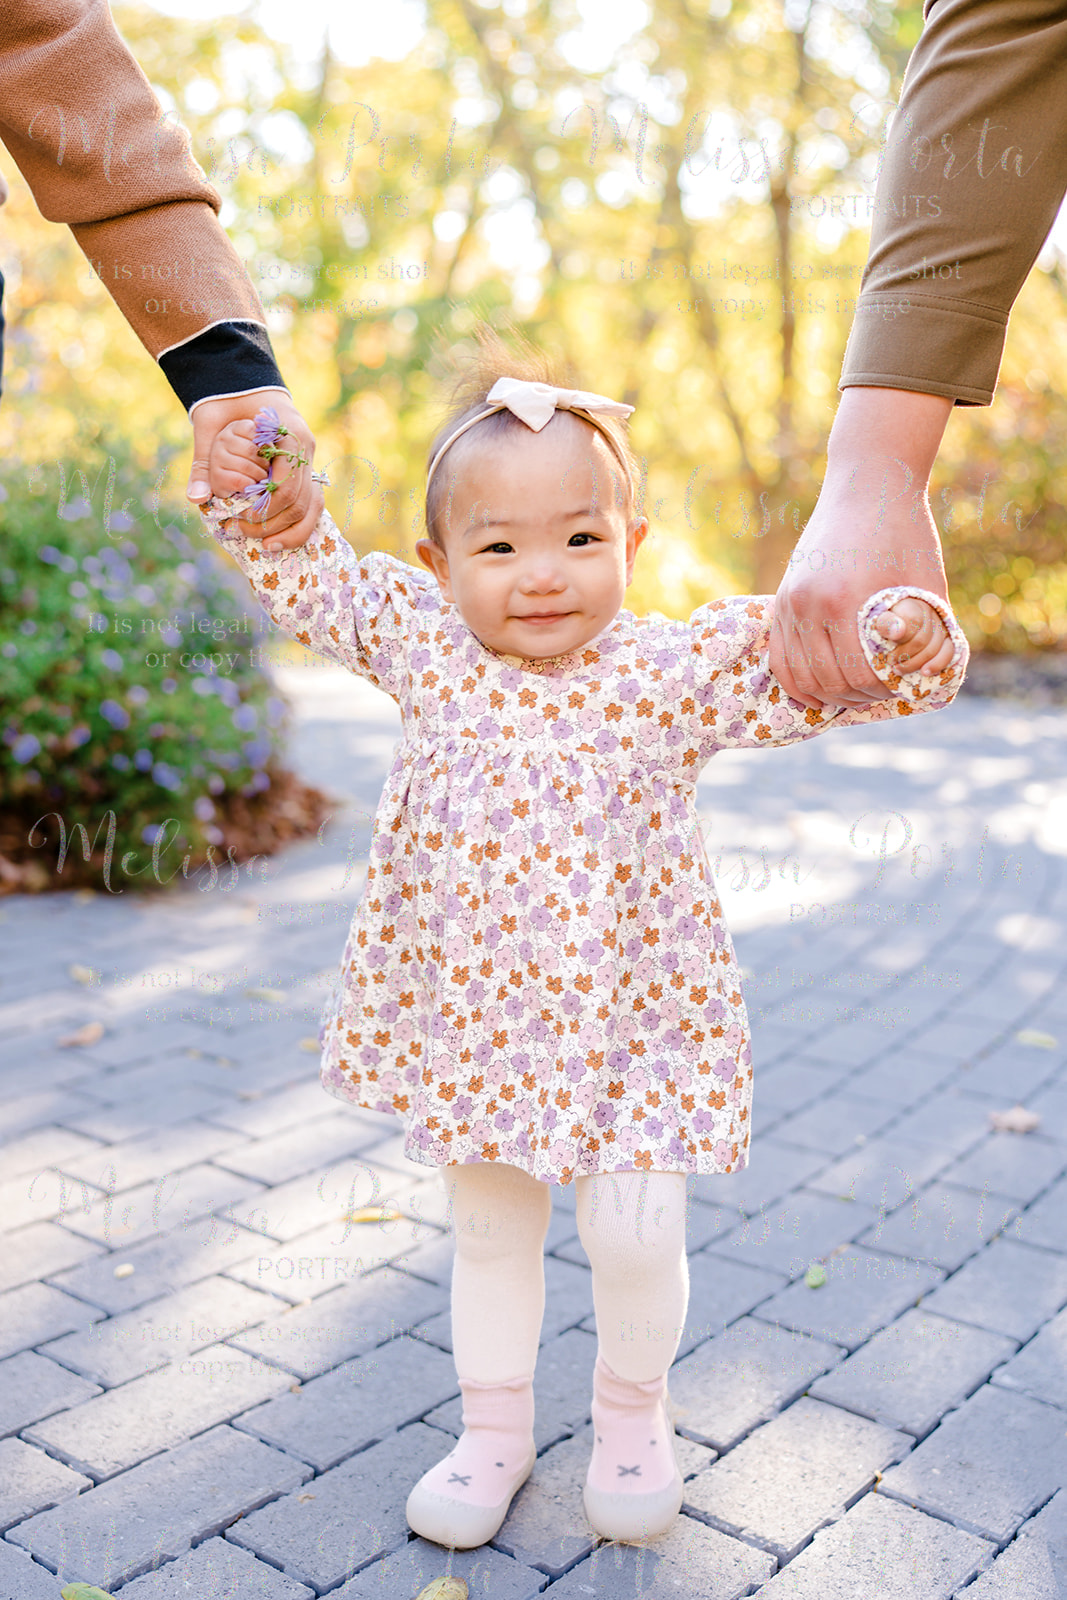 Baby holding her parents hands on a path with bright yellow trees in the background at the Conservancy in Woodstock, MD